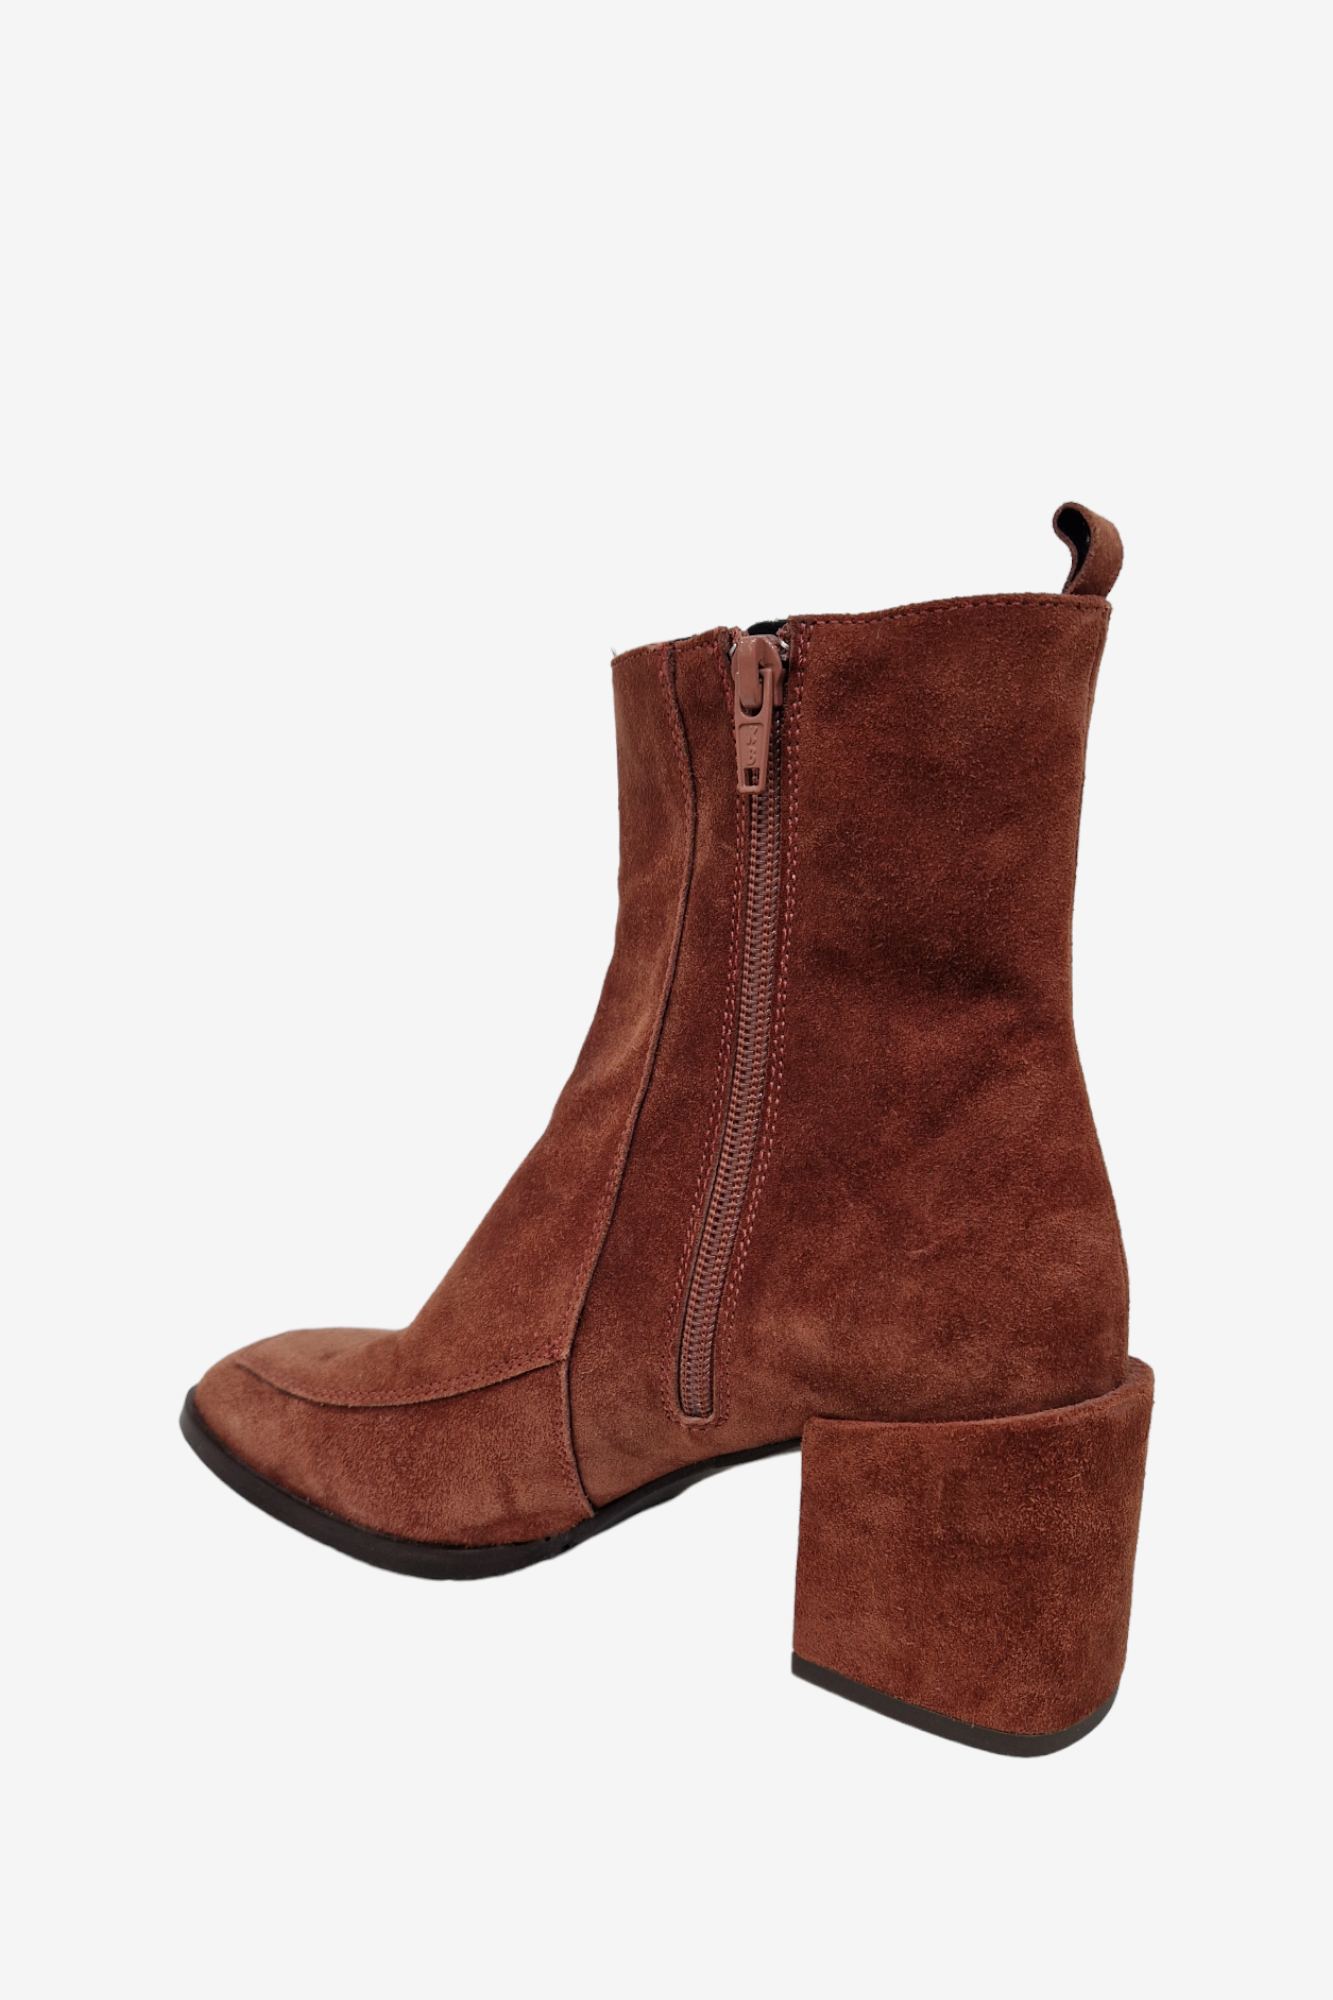 MARIAN 15209 RUST SUEDE LEATHER BOOT